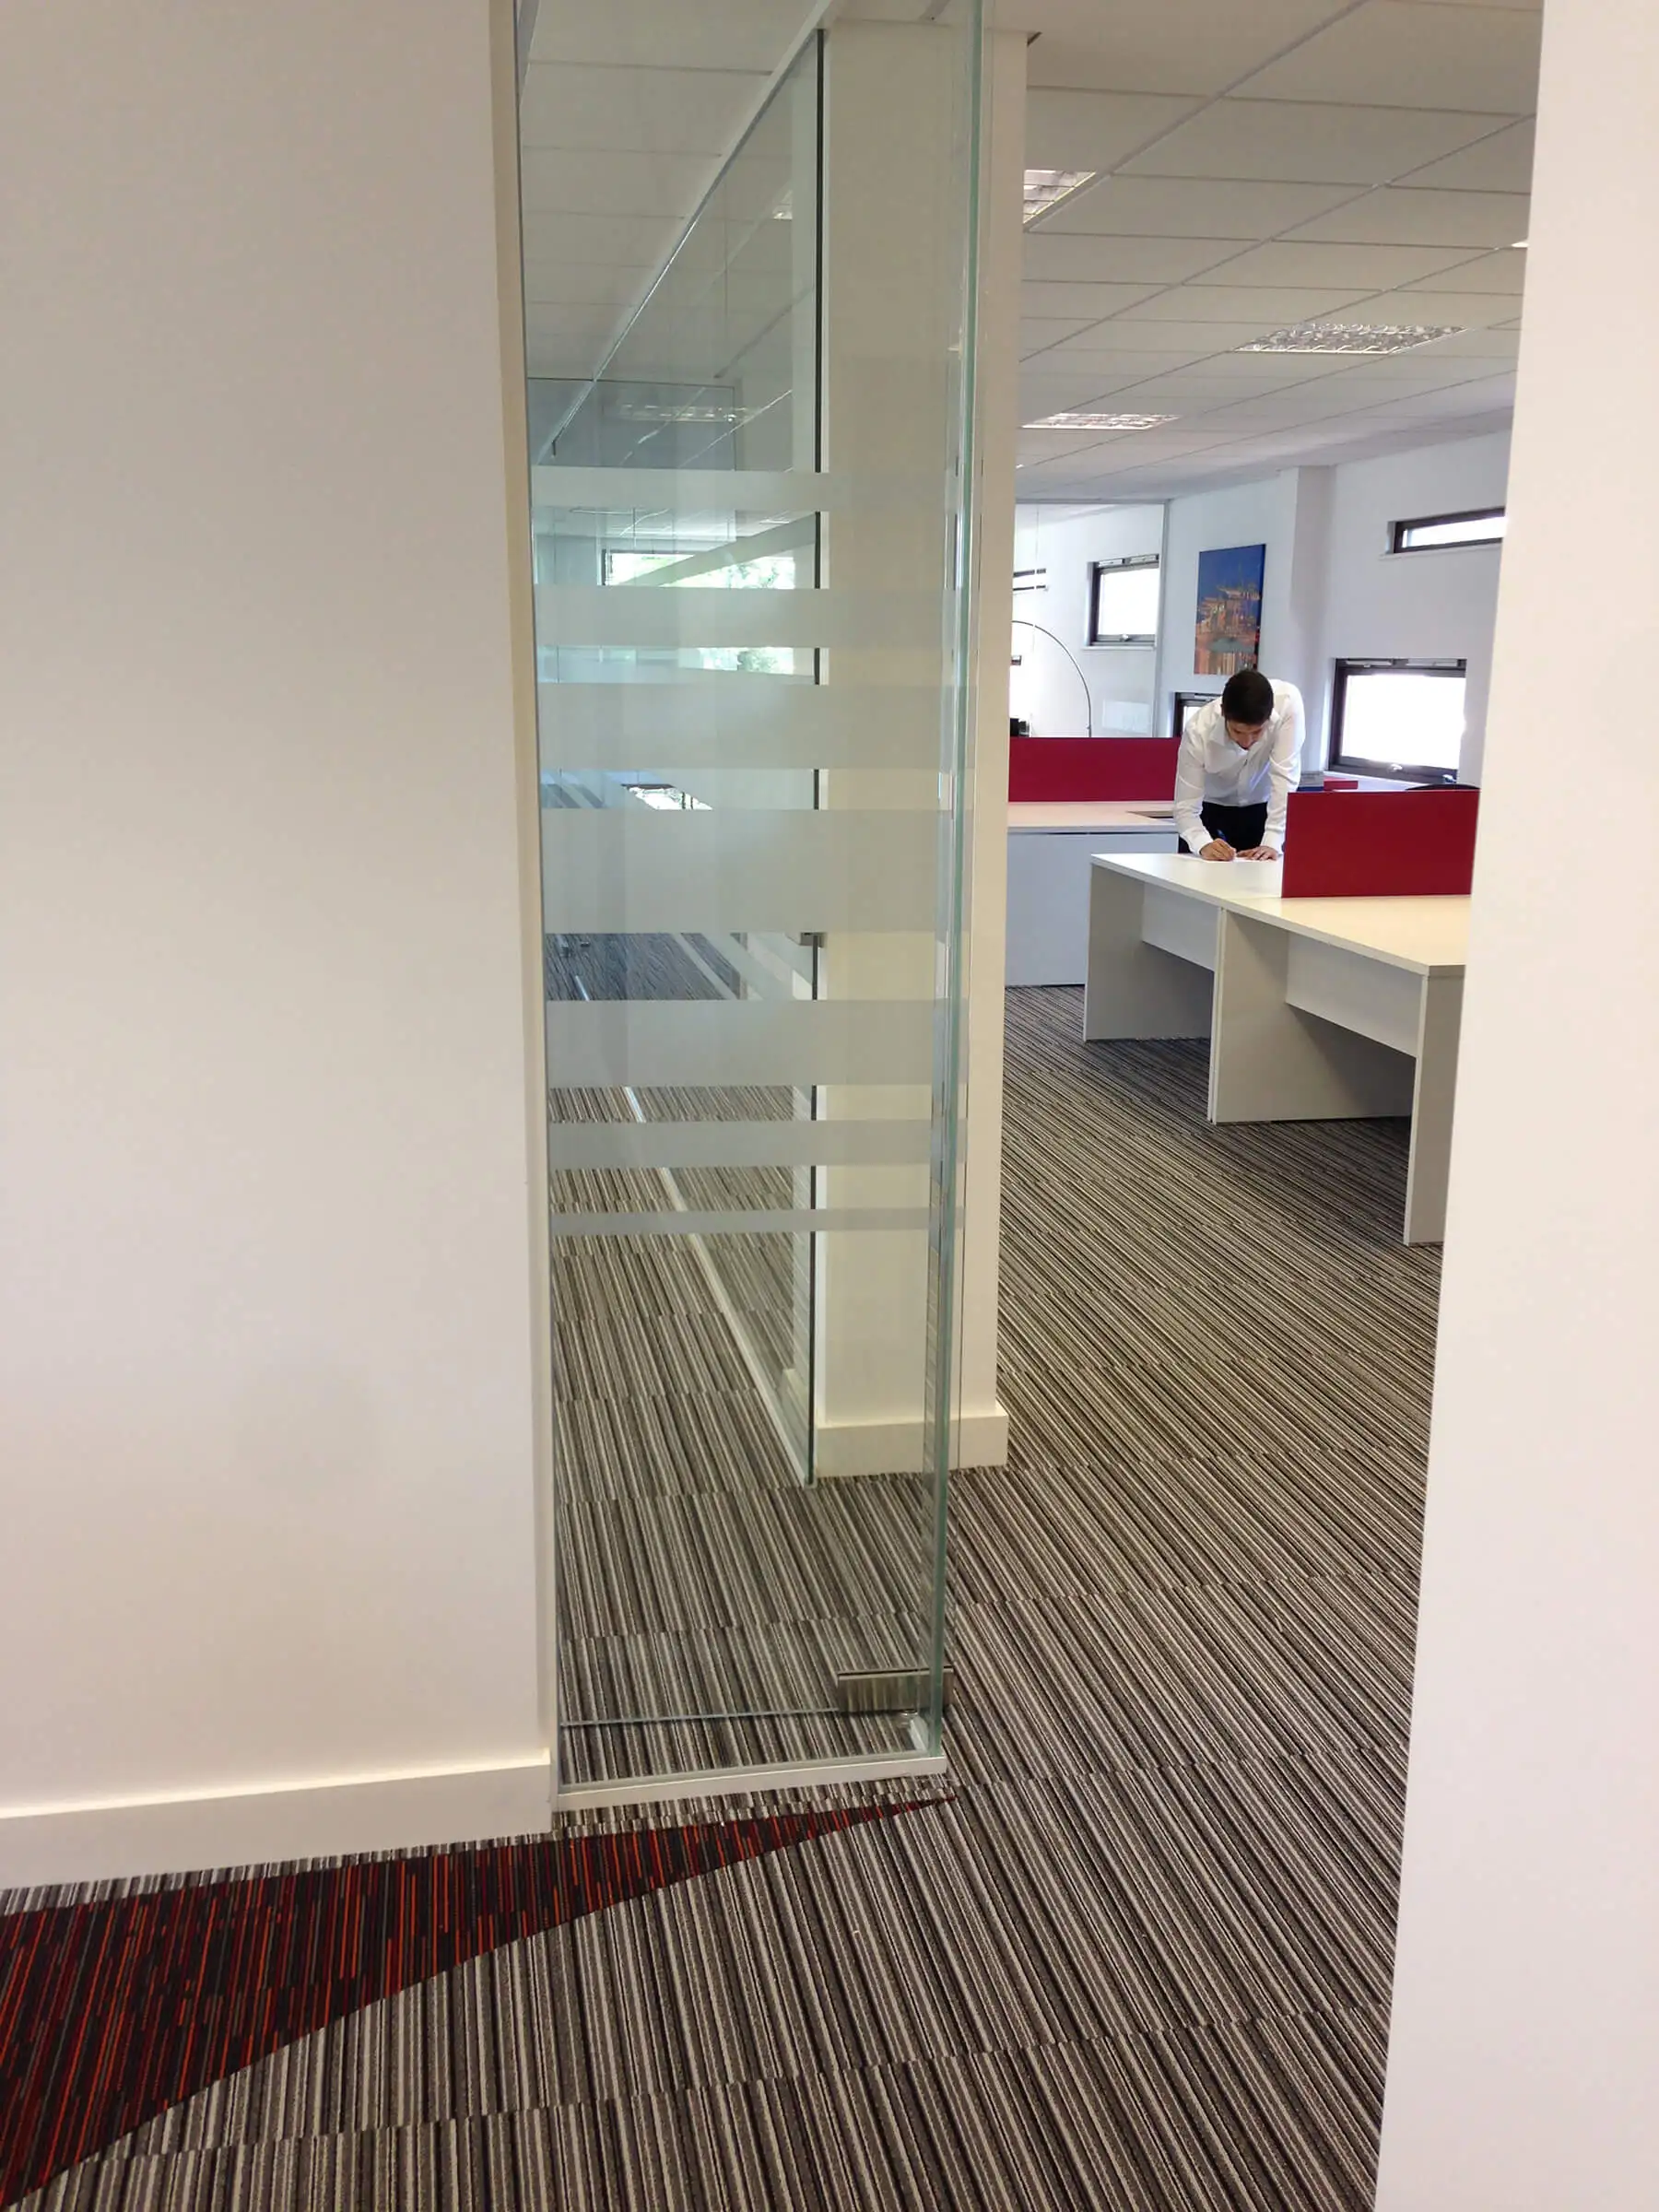 Designer flooring and single glazed glass partition in office space